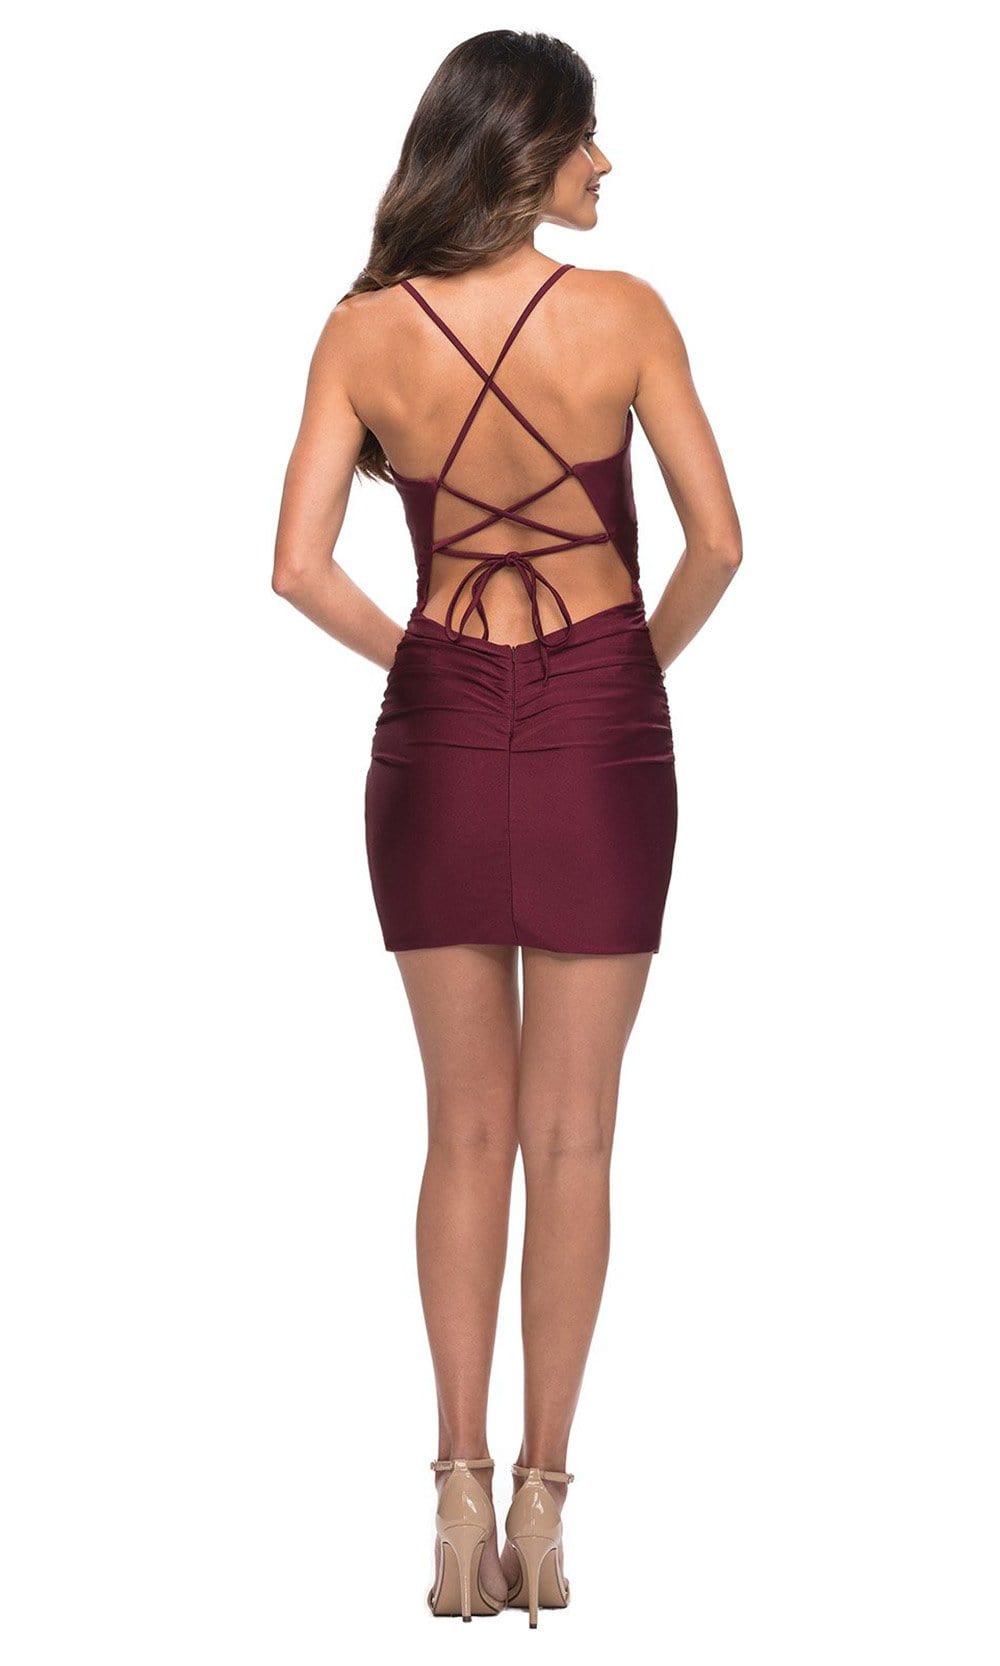 La Femme - Deep V-Neck Ruched Short Dress 30248SC - 1 pc Dark Berry In Size 00 Available CCSALE 00 / Dark Berry